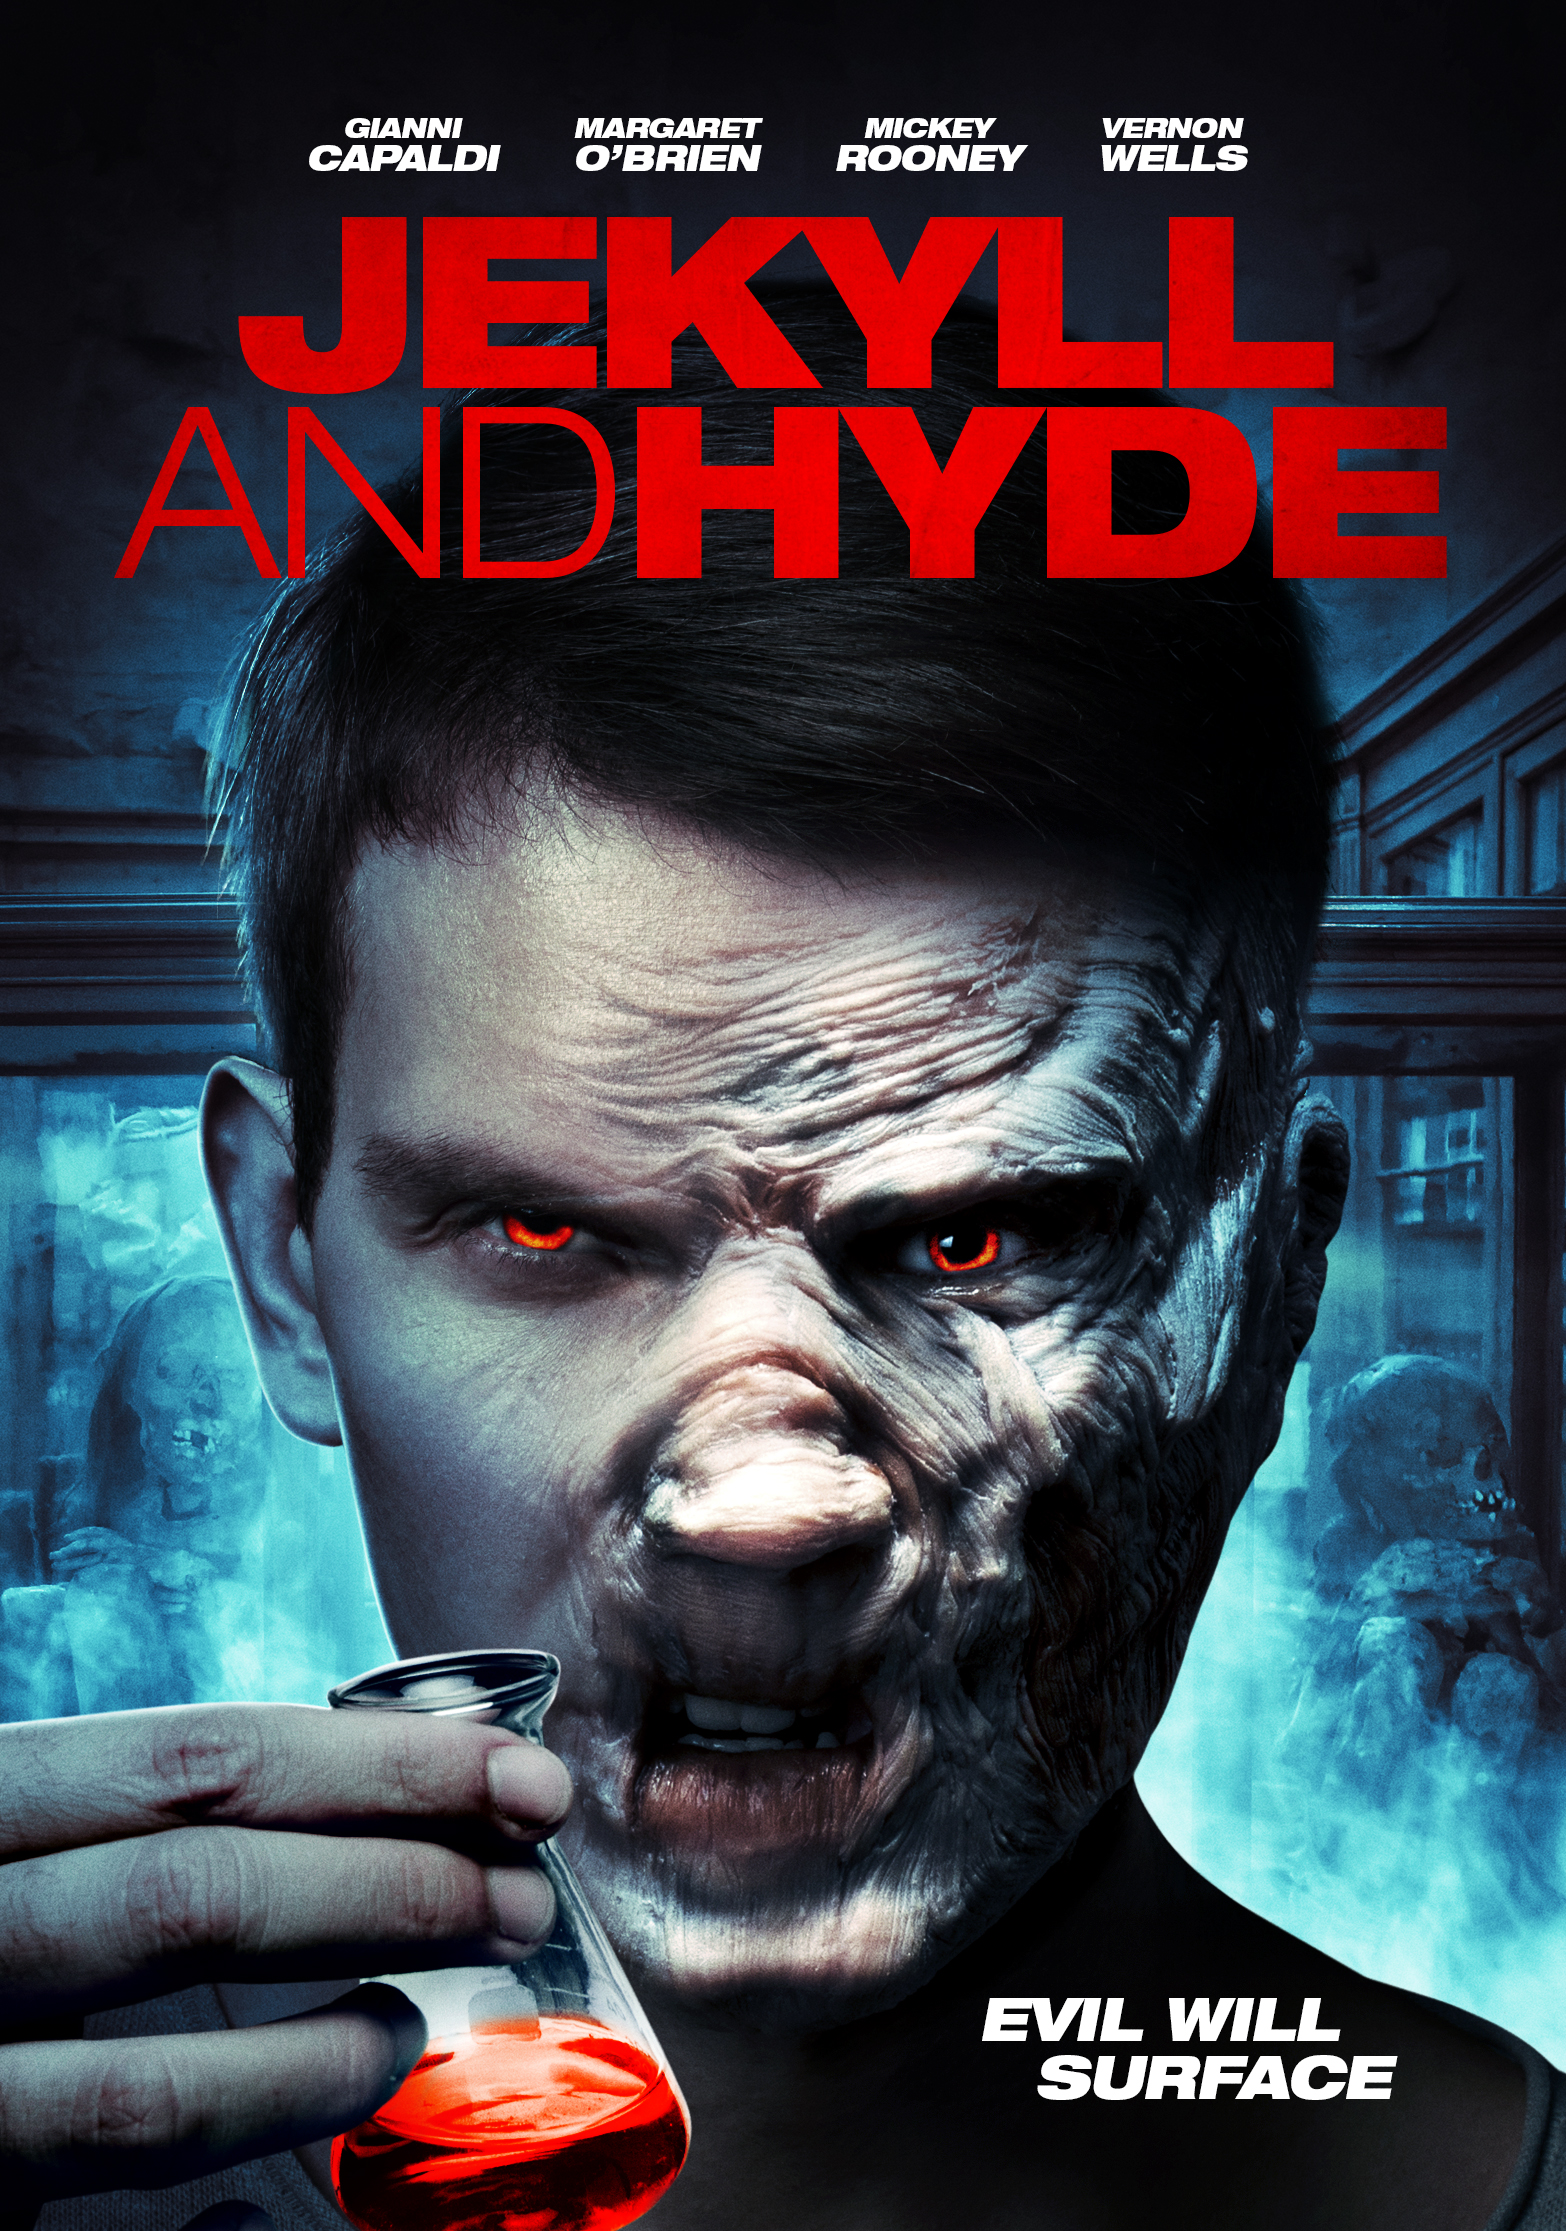 Jekyll And Hyde | Soundview Media Partners LLC